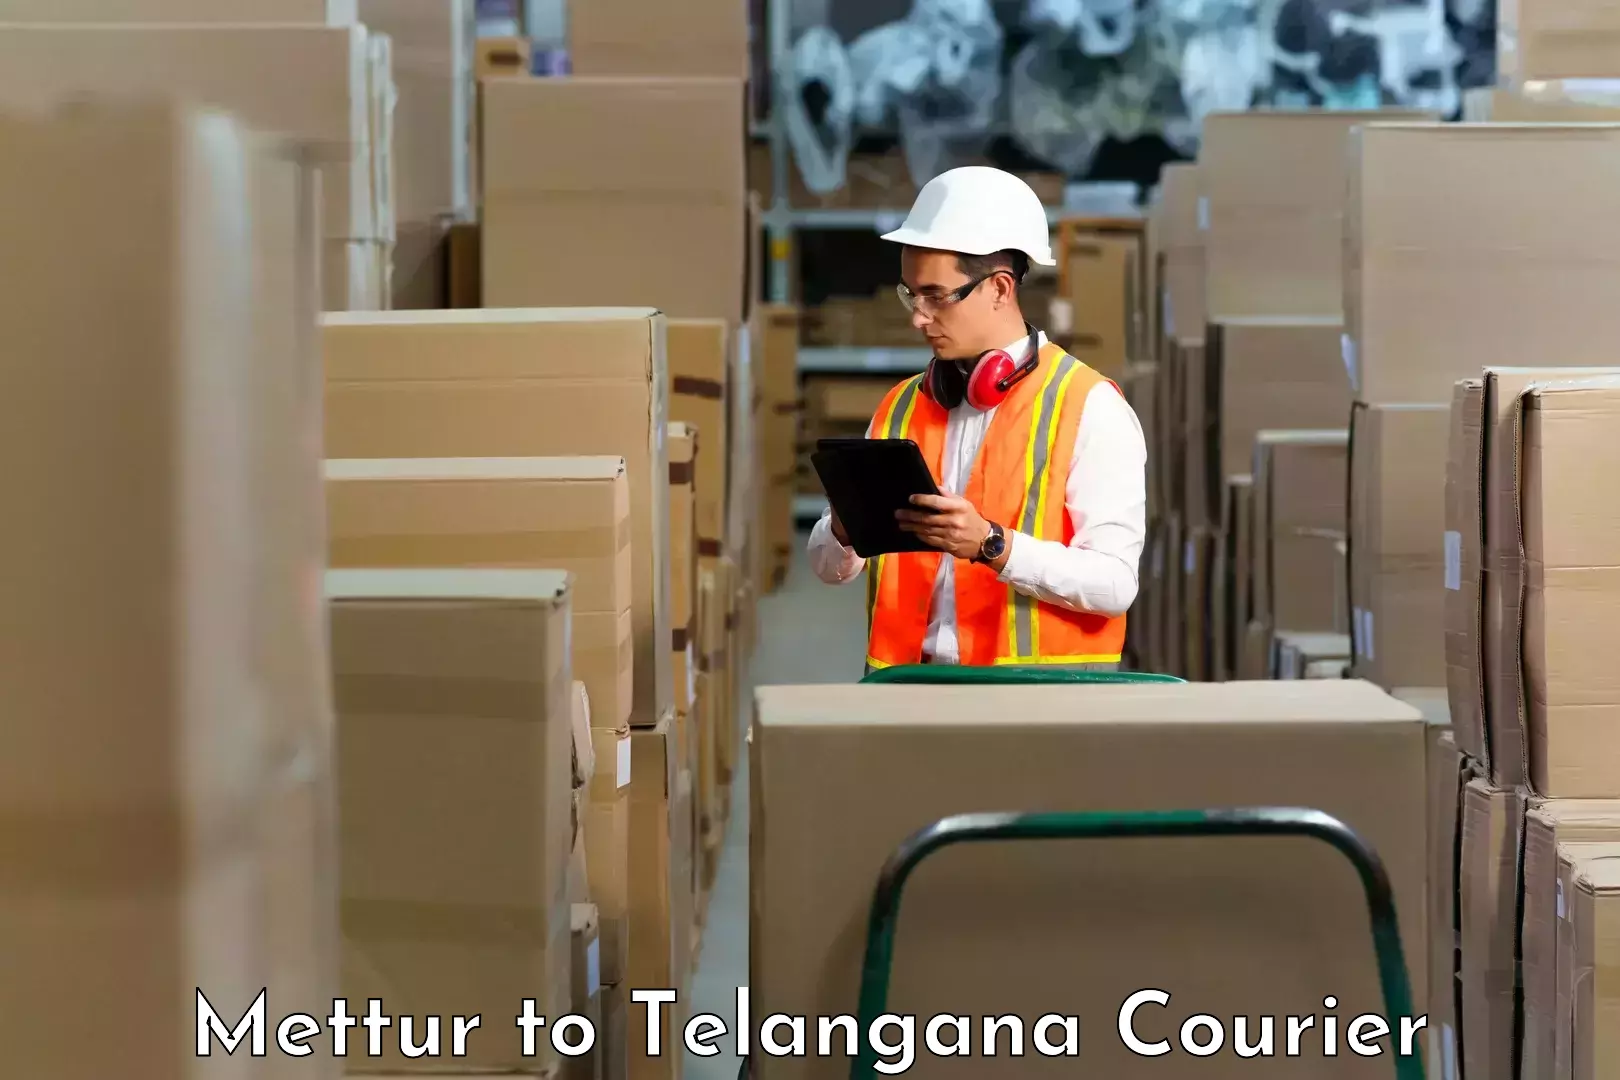 On-call courier service Mettur to IIT Hyderabad